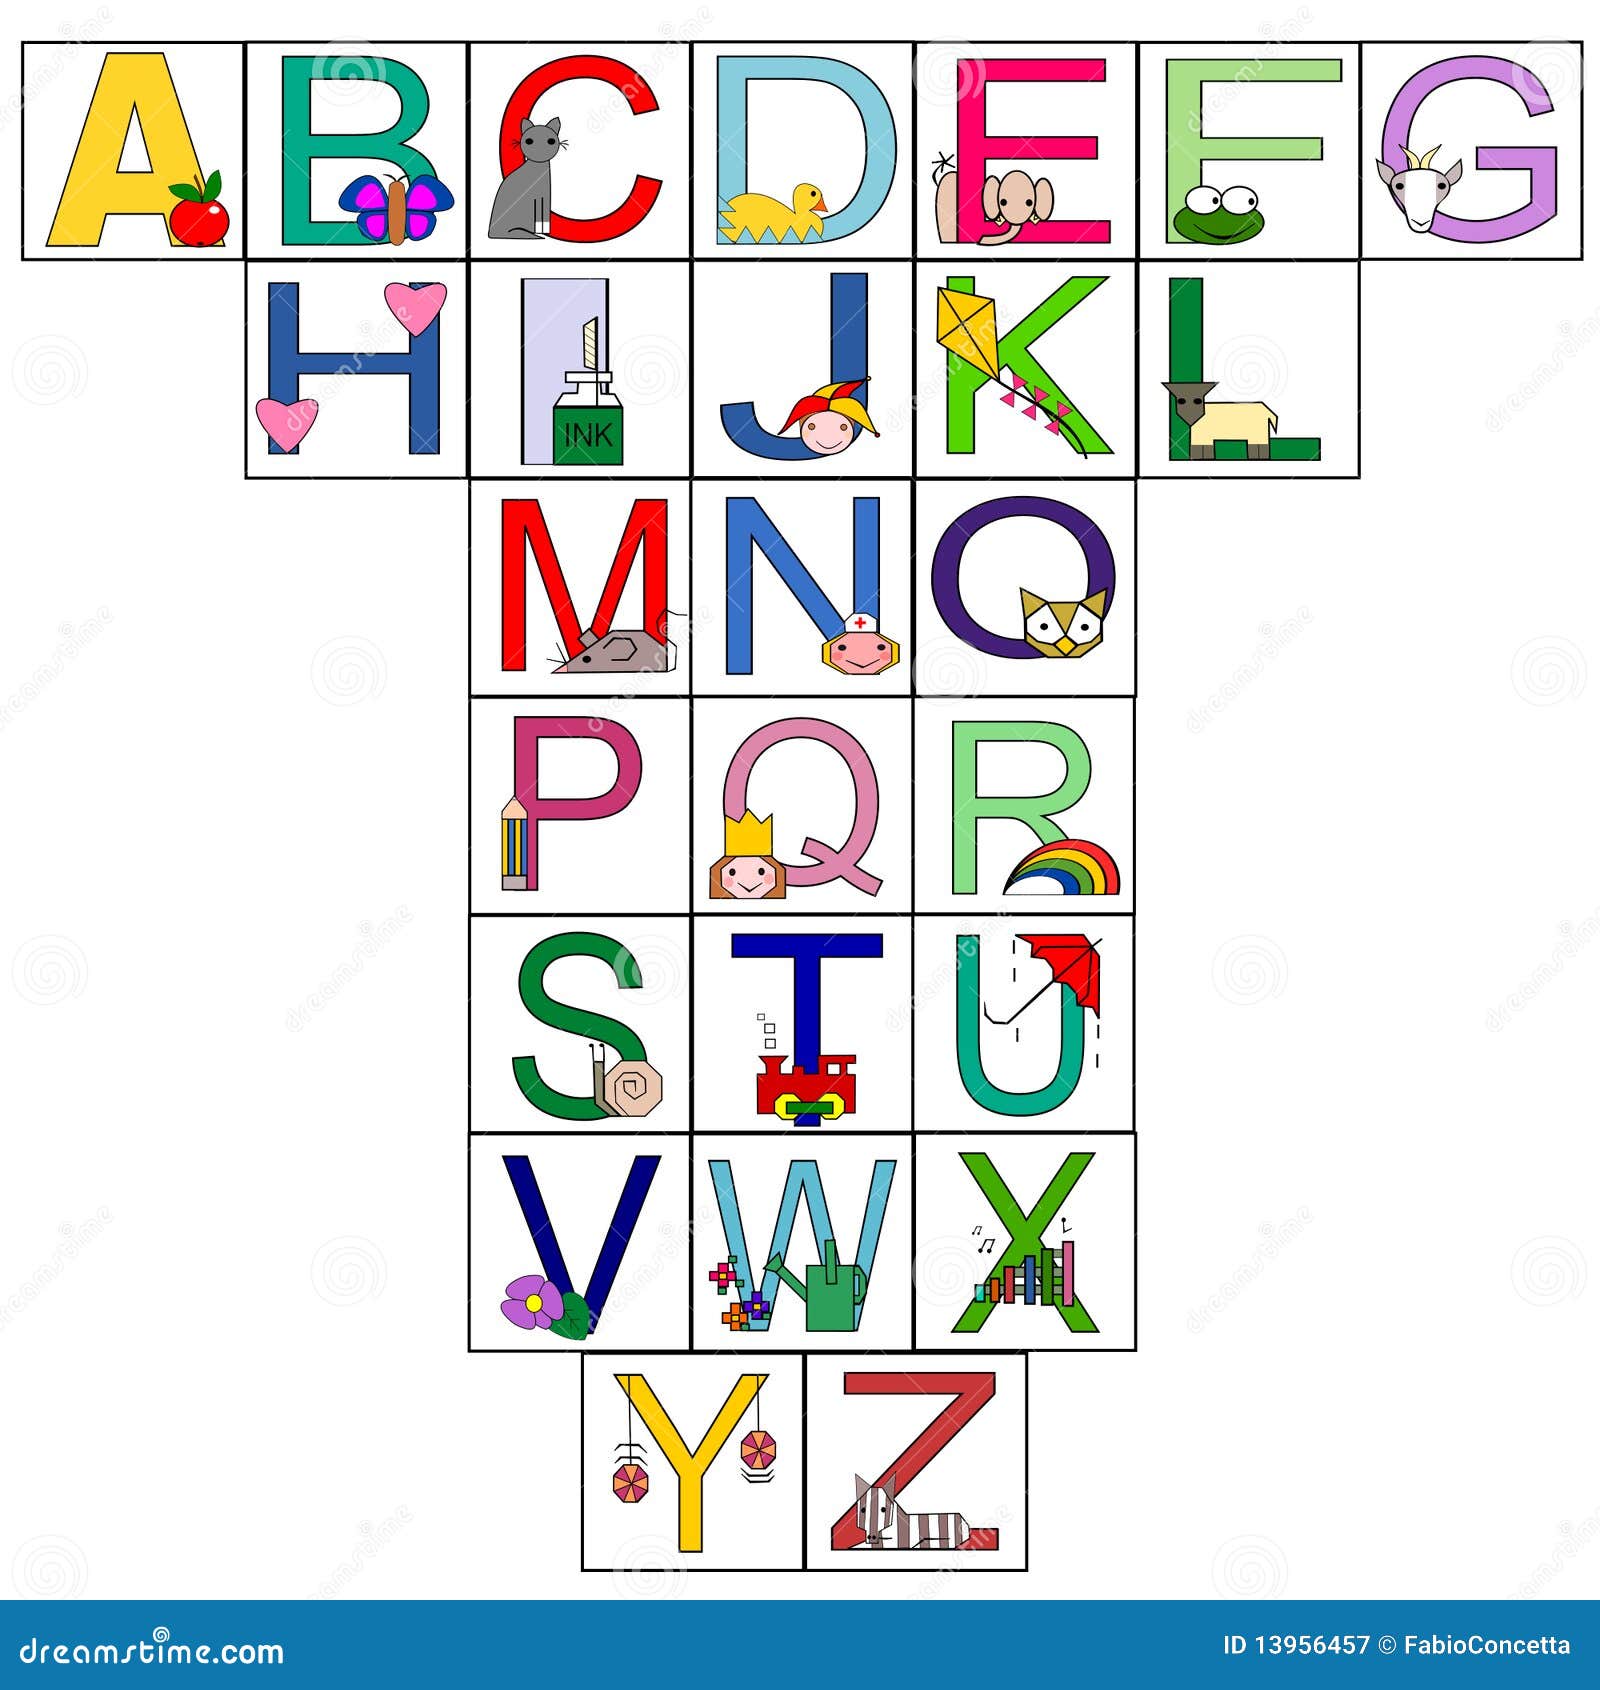 How Many Letters Are in the Alphabet?